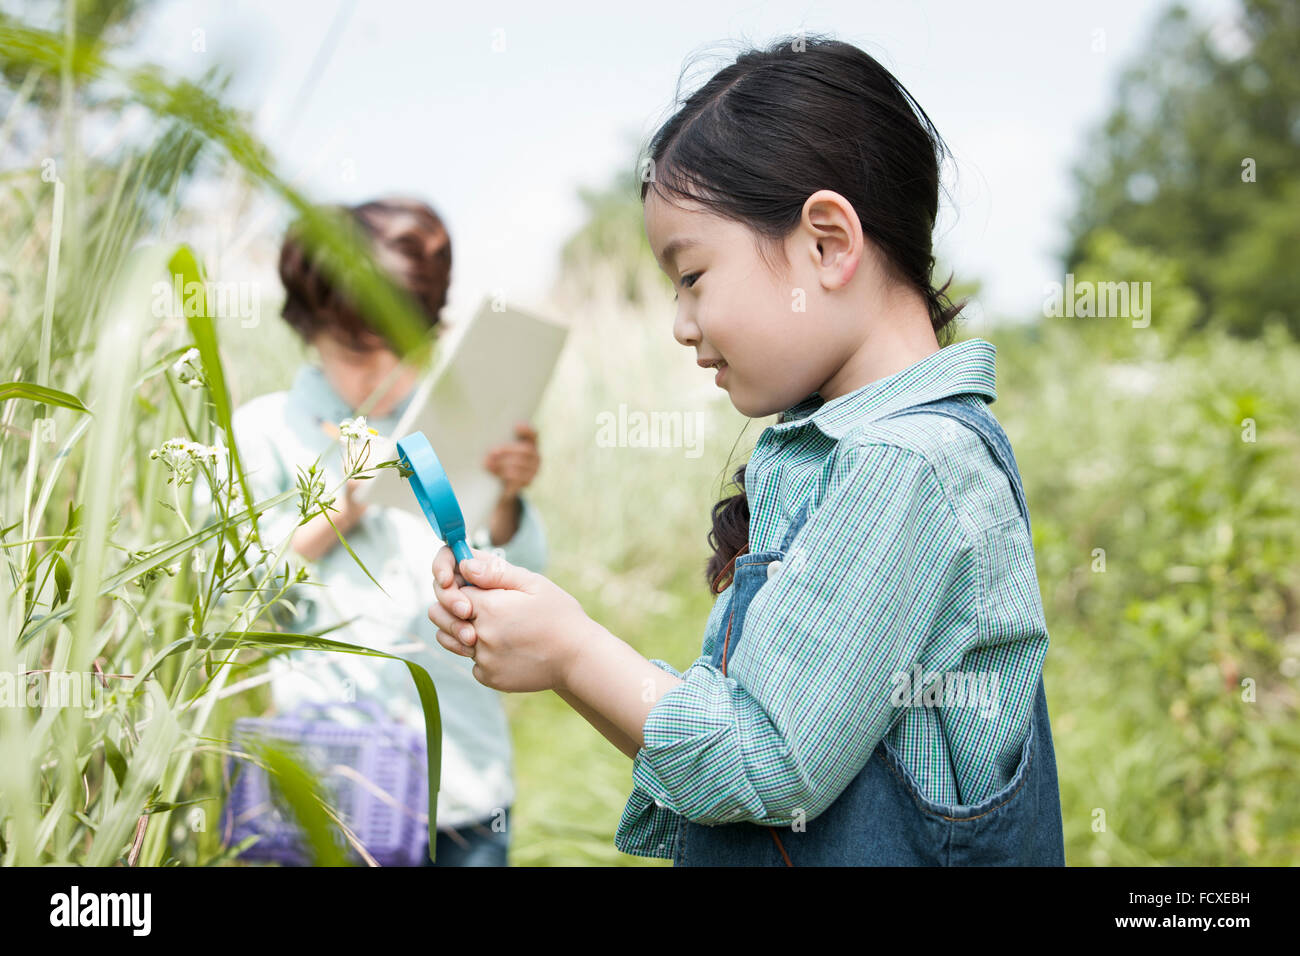 Girl observing plants through a magnifying glass with the background of a boy in concentration at field Stock Photo